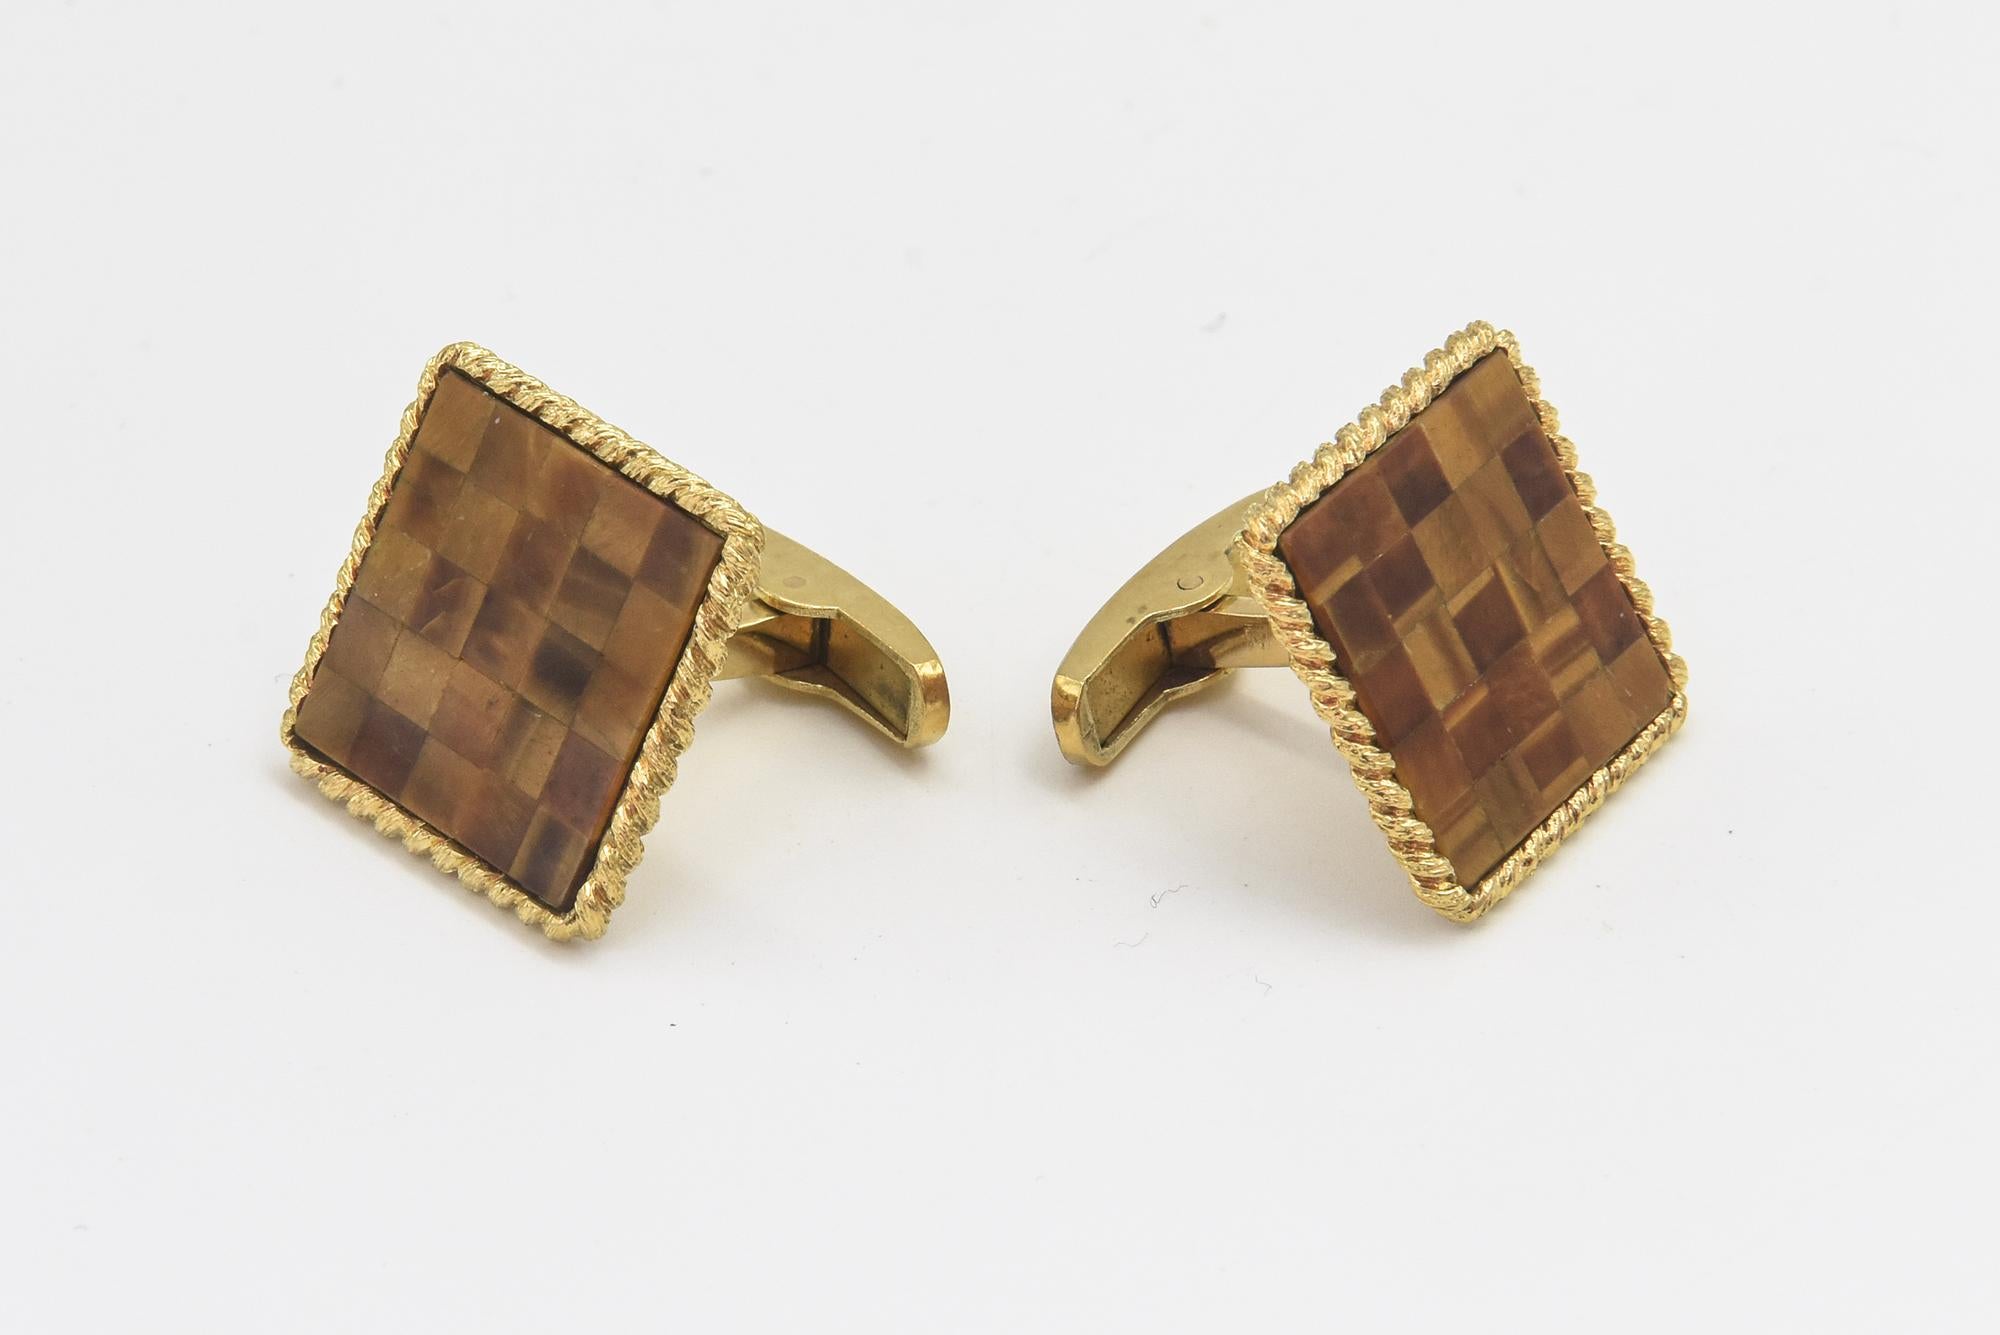 Checkerboard mosaic made with pieces of tiger's eye set within a twisted 14k yellow gold frame to make a stunning pair of cufflinks from the 1960s.  These impressive cufflinks have an easy to use t-bar closure.  They are stamped AR 14k.